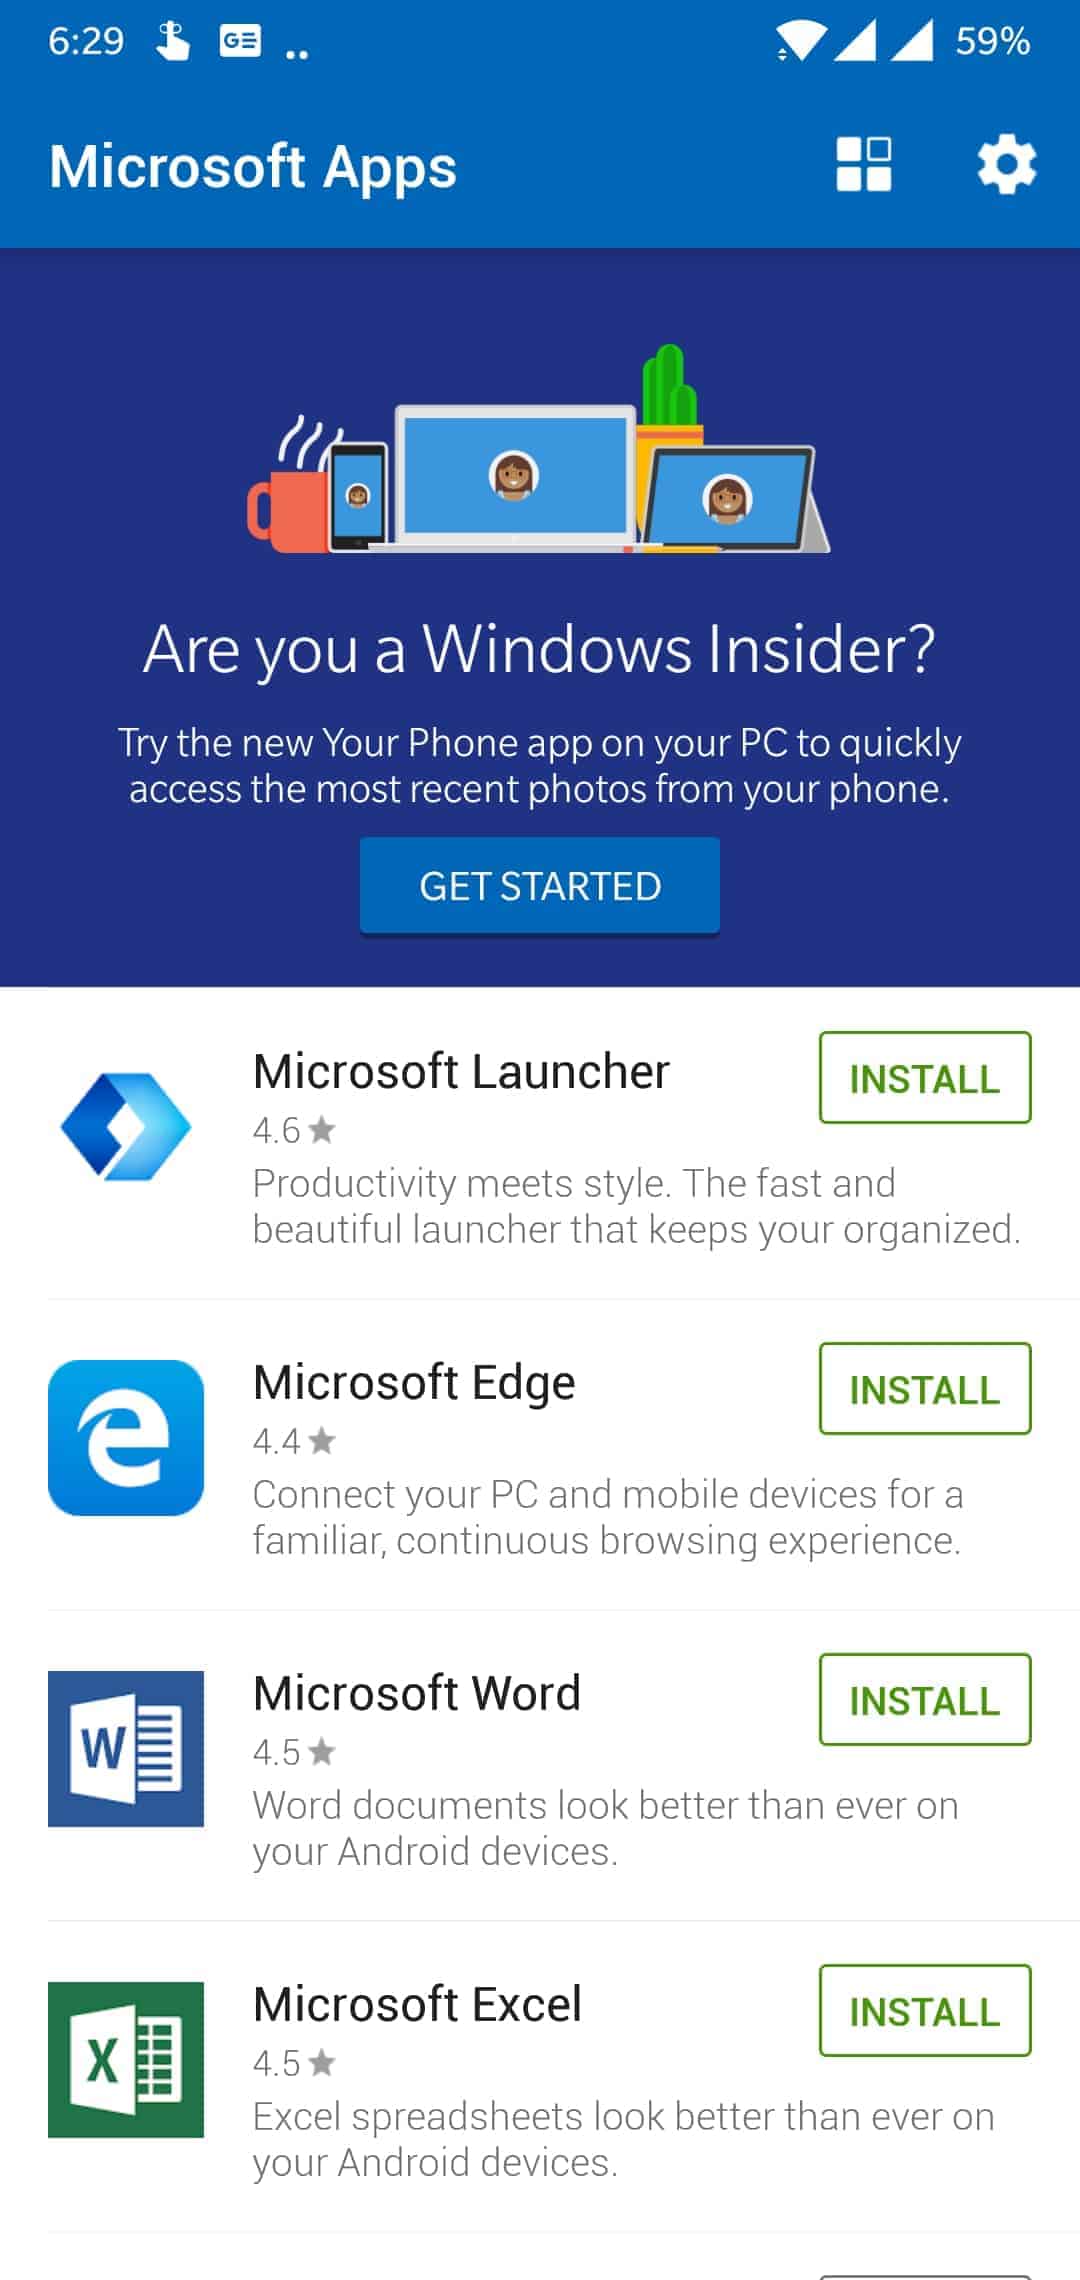 Microsoft Apps Android app